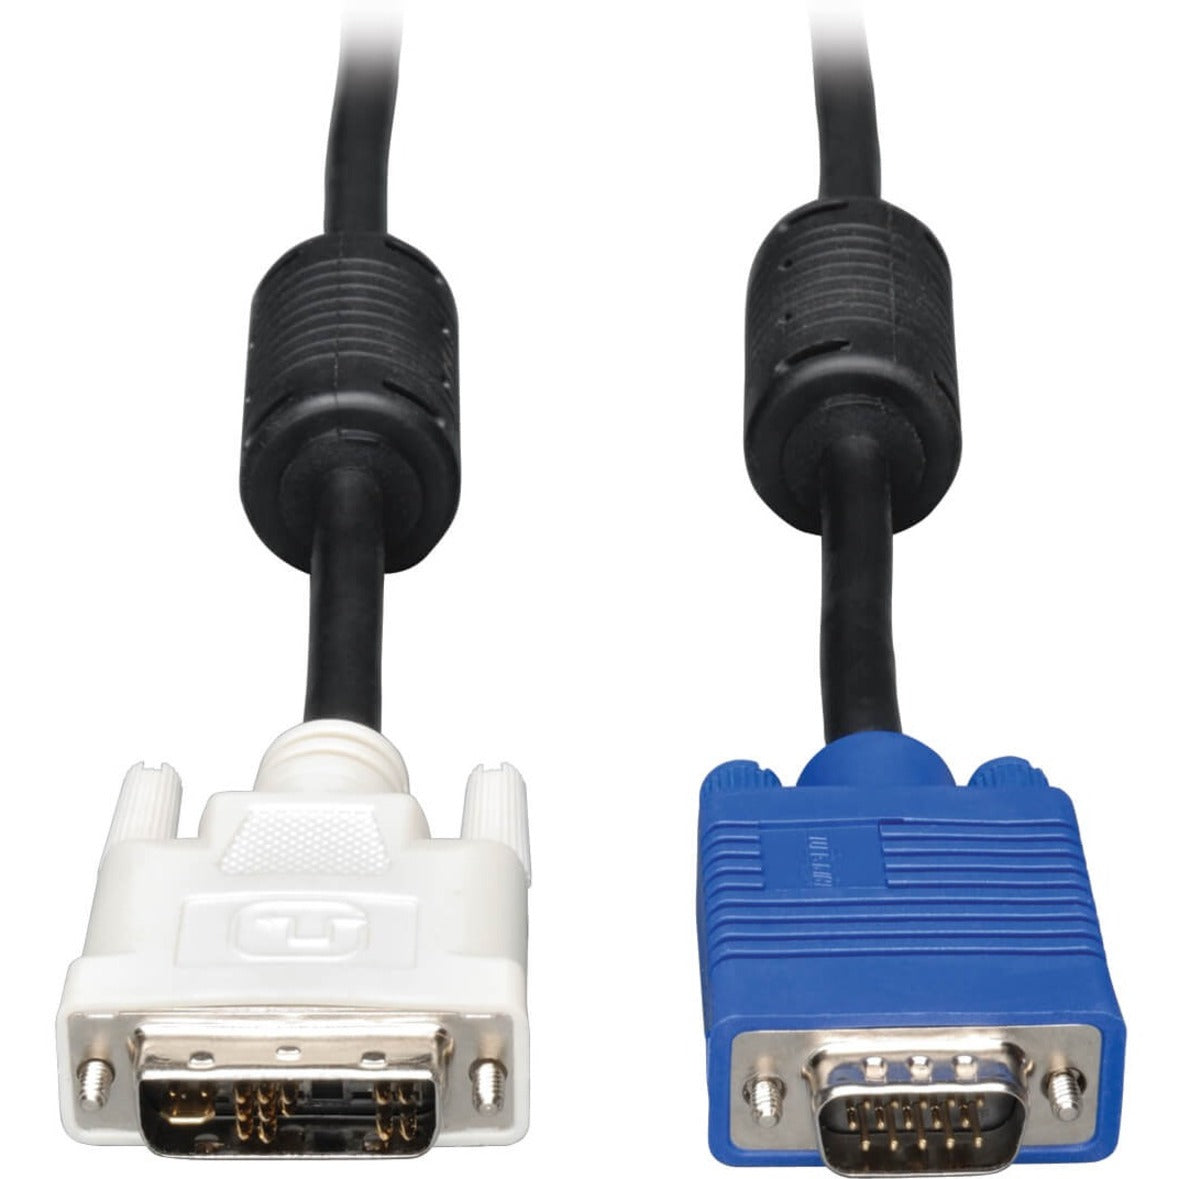 Tripp Lite P556-006 DVI Cable, 6 ft, EMI/RF Protection, Molded, Strain Relief, Gold-Plated Connectors